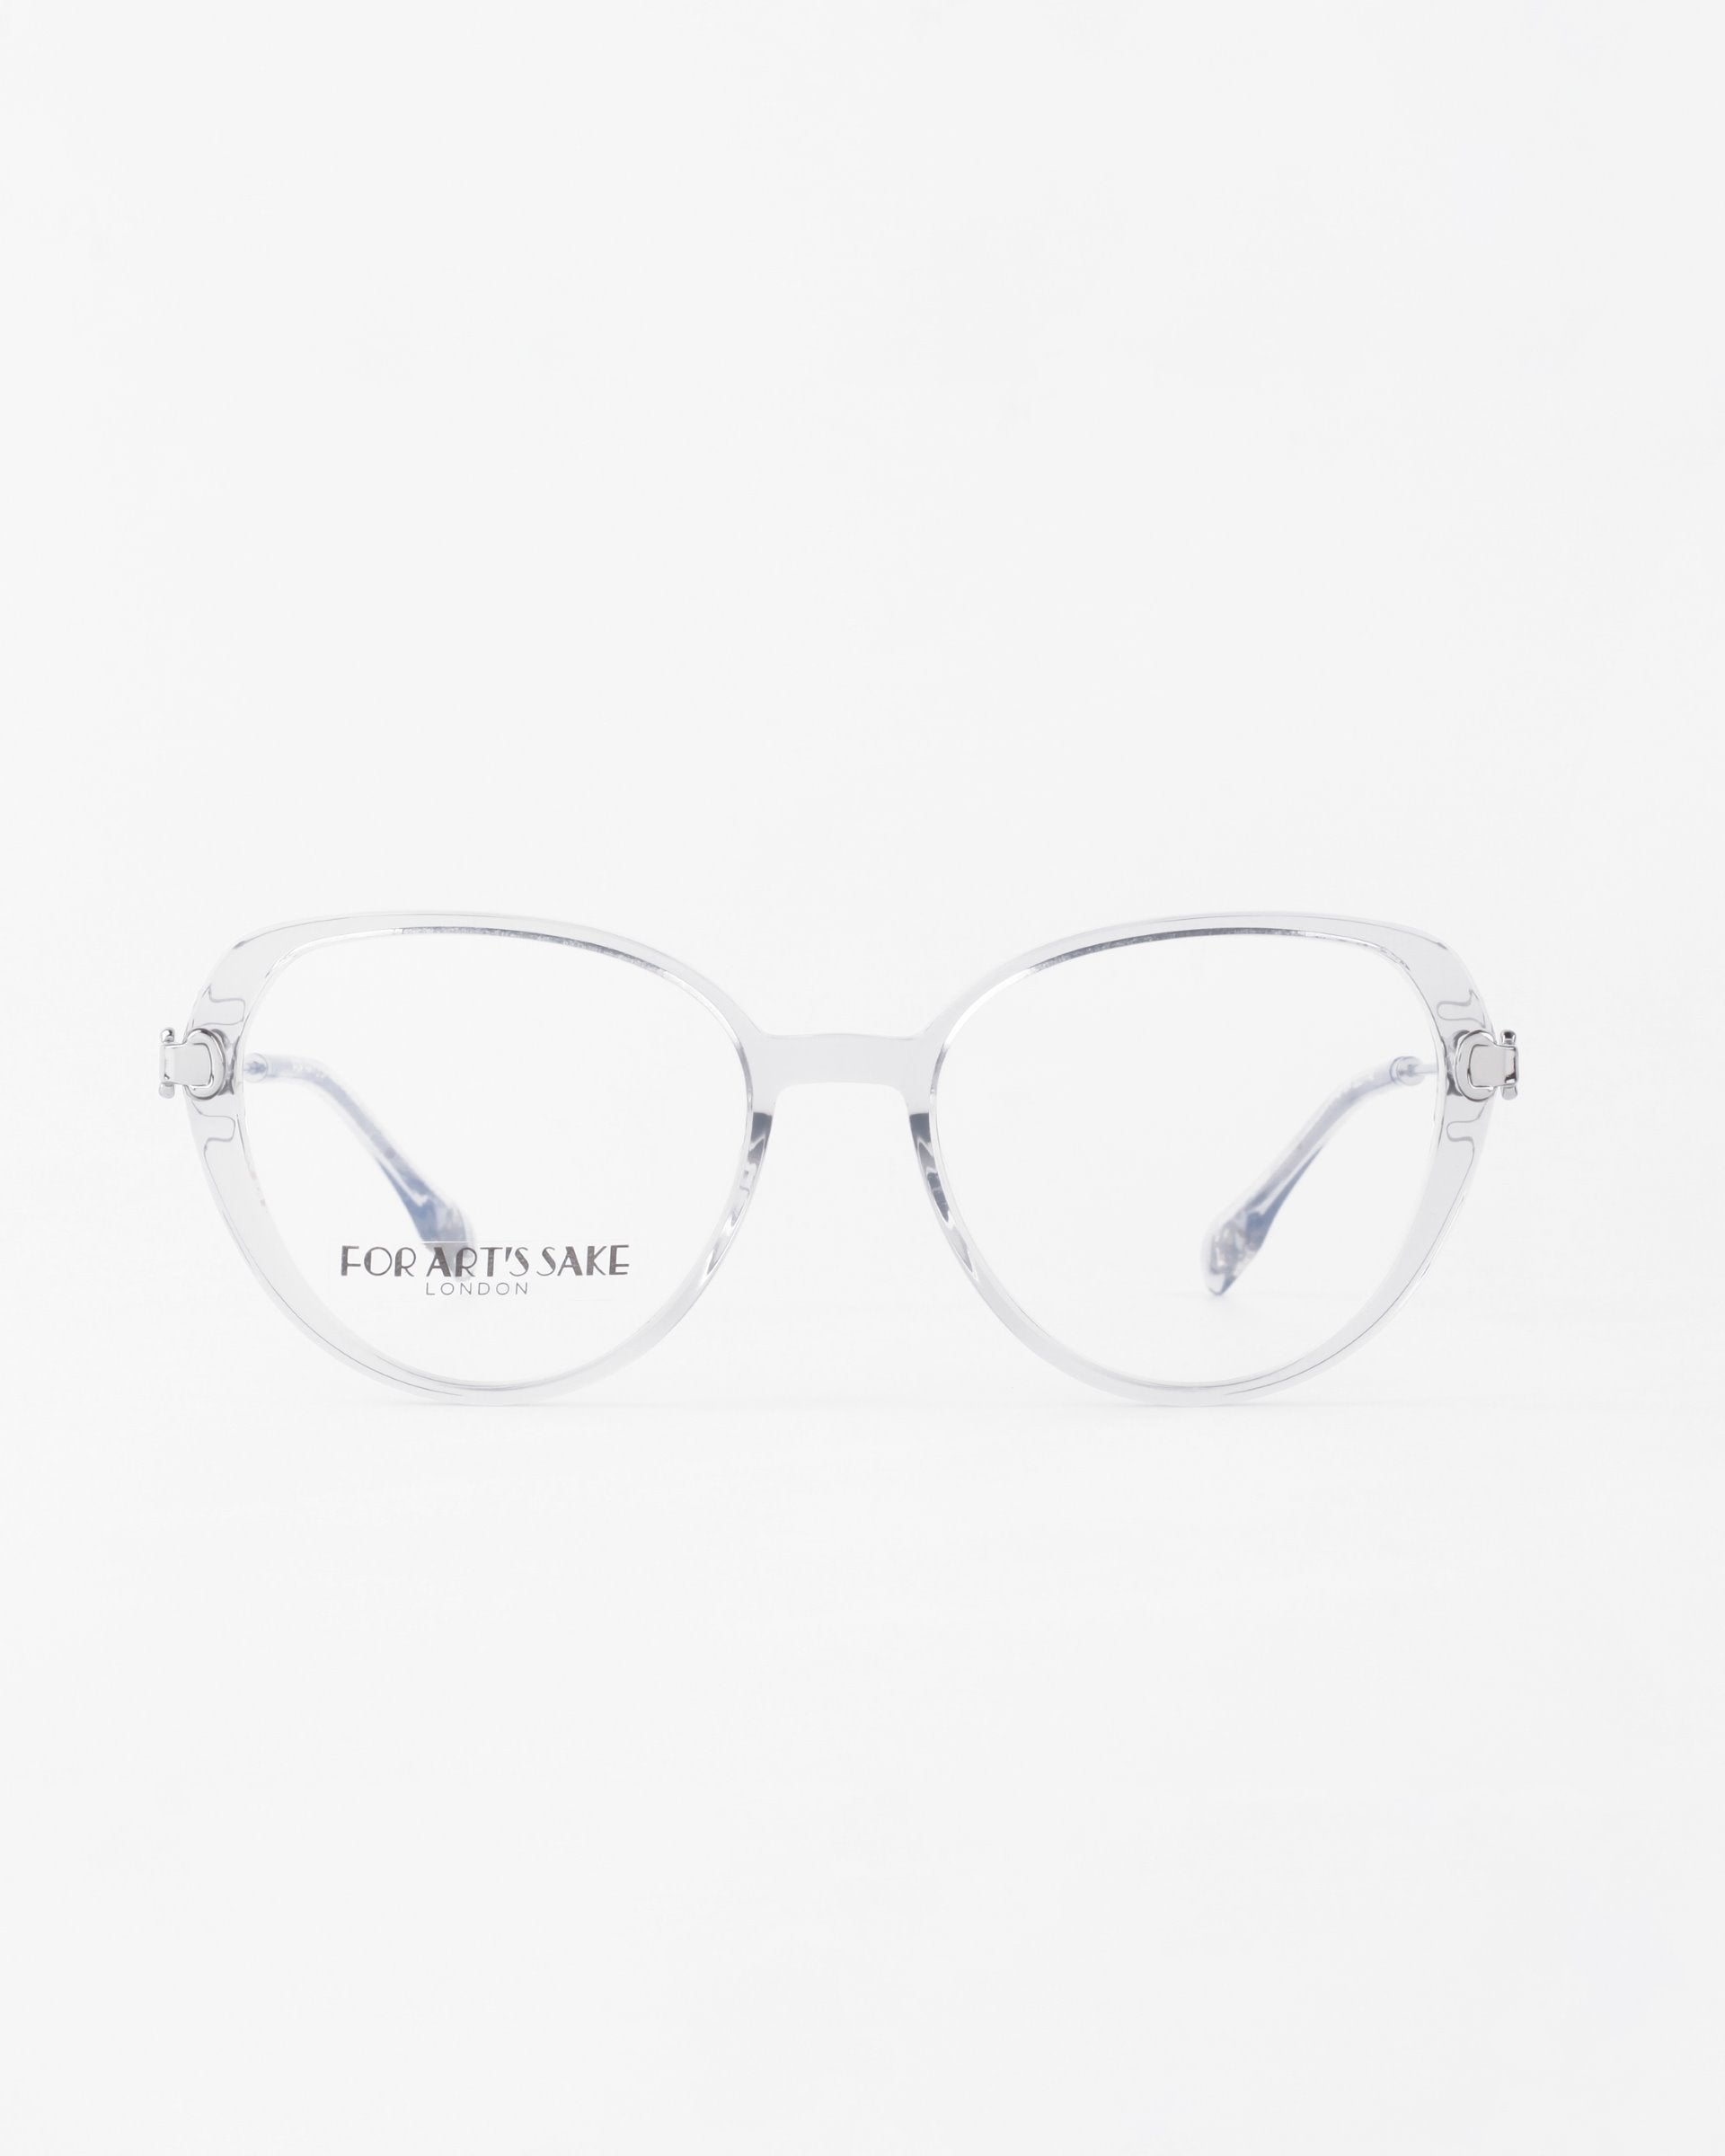 A pair of clear-frame eyeglasses with round lenses is positioned against a white background. The words "FOR ARTS SAKE" and "LONDON" are printed in small font on one of the lenses. These stylish Waterhouse frames by For Art's Sake® can be fitted with prescription lenses for optimal vision correction.